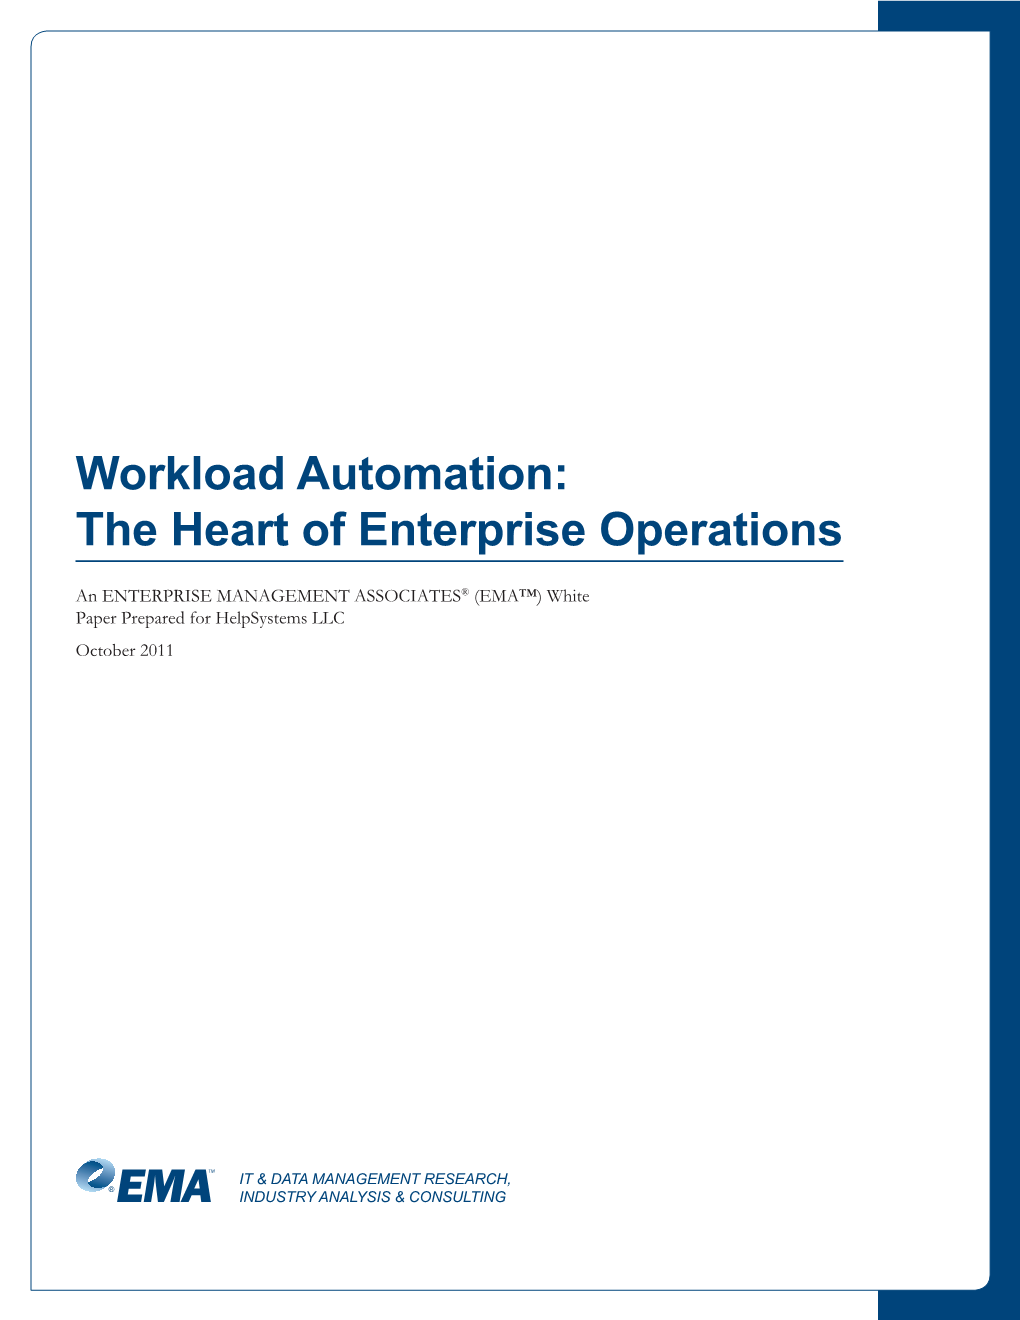 Workload Automation: the Heart of Enterprise Operations